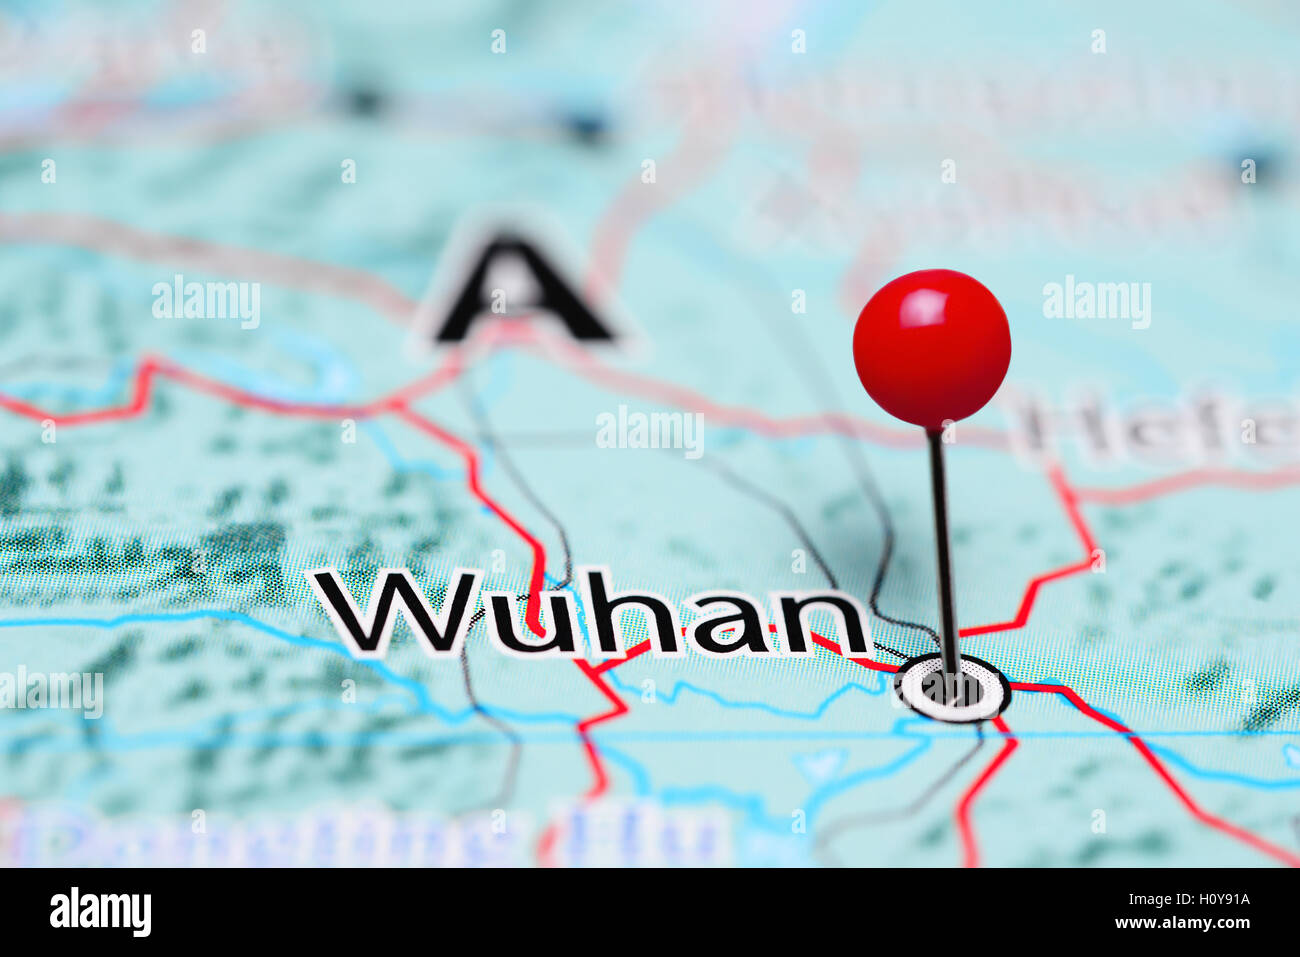 Wuhan pinned on a map of China Stock Photo